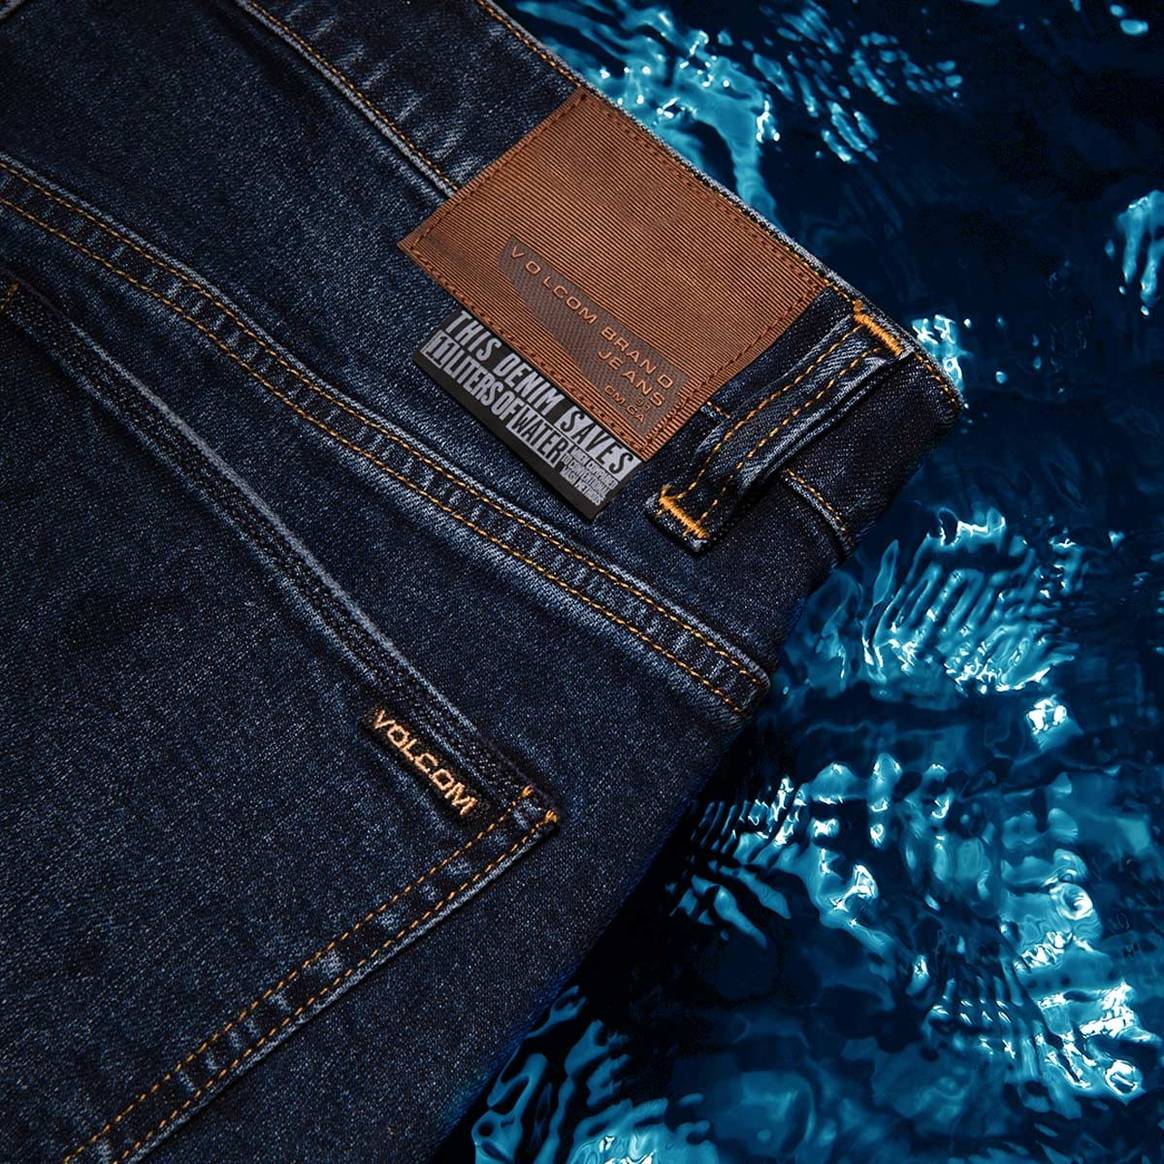 Volcom launches ‘Water Aware’ denim collection